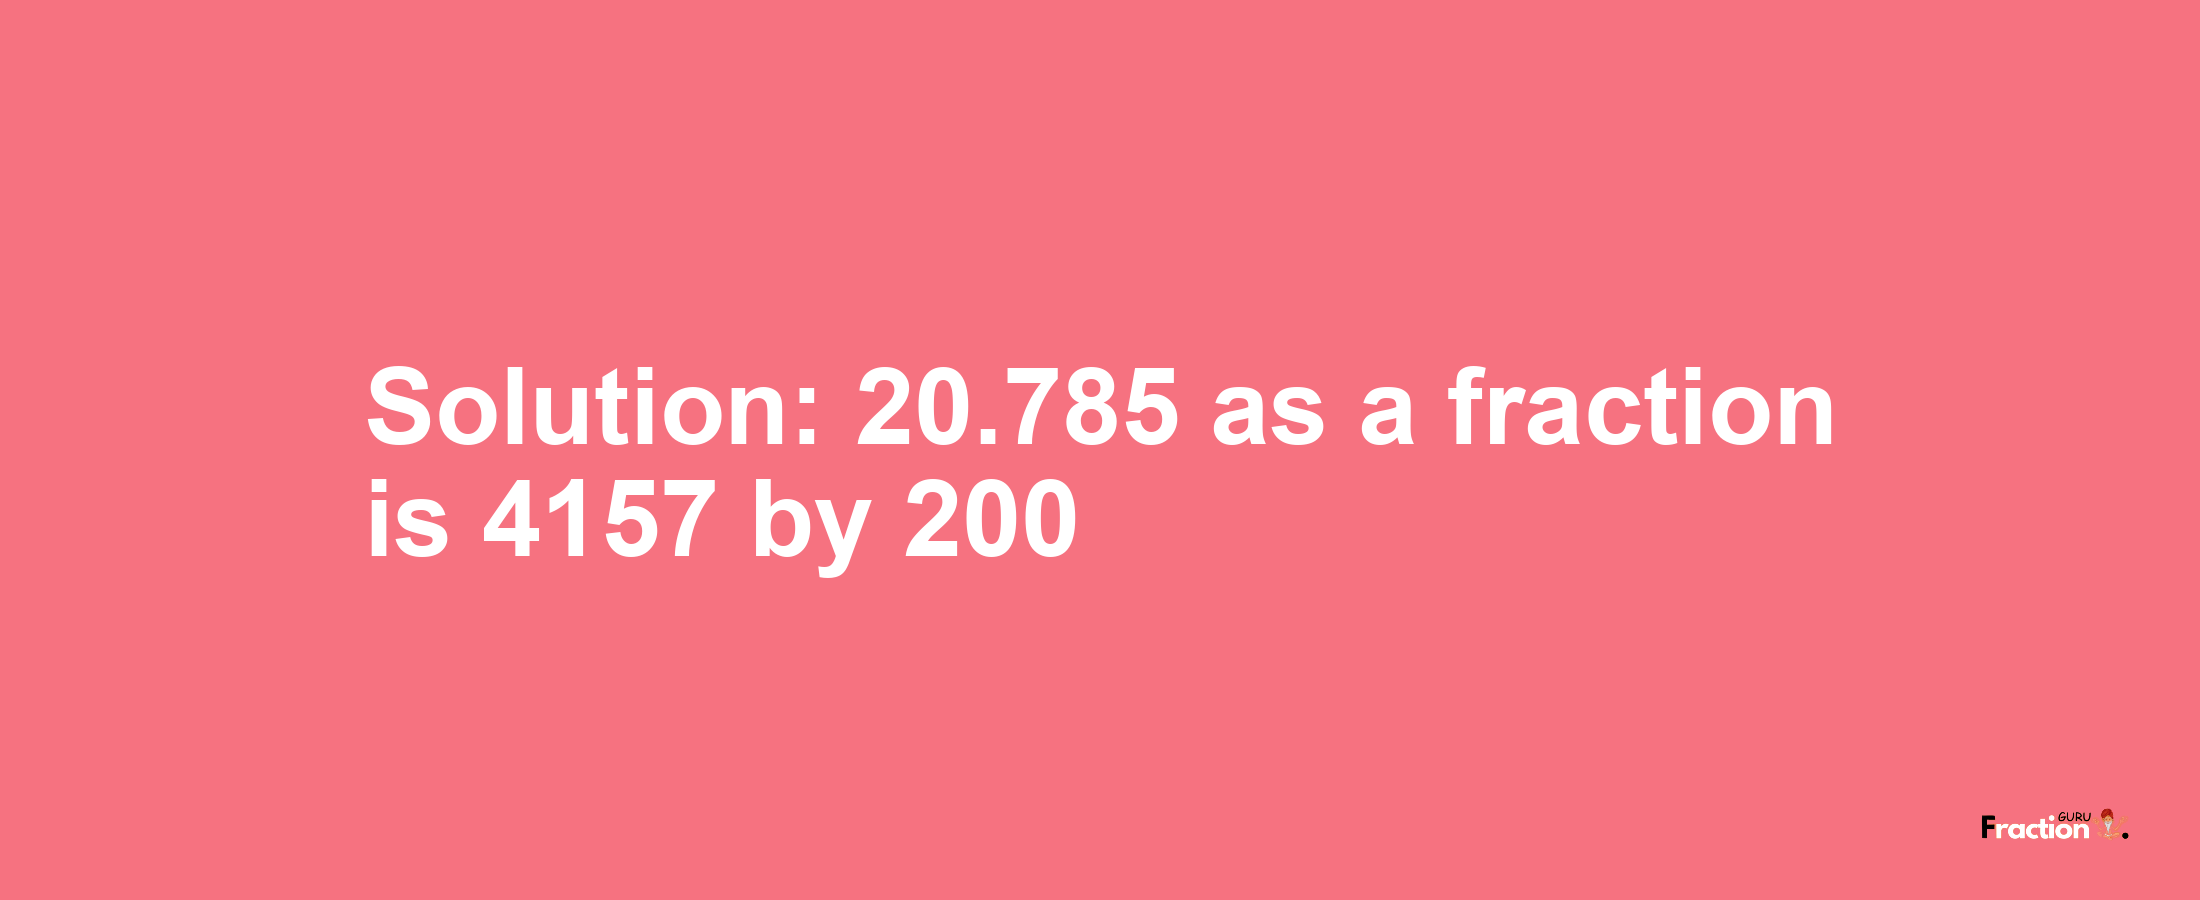 Solution:20.785 as a fraction is 4157/200